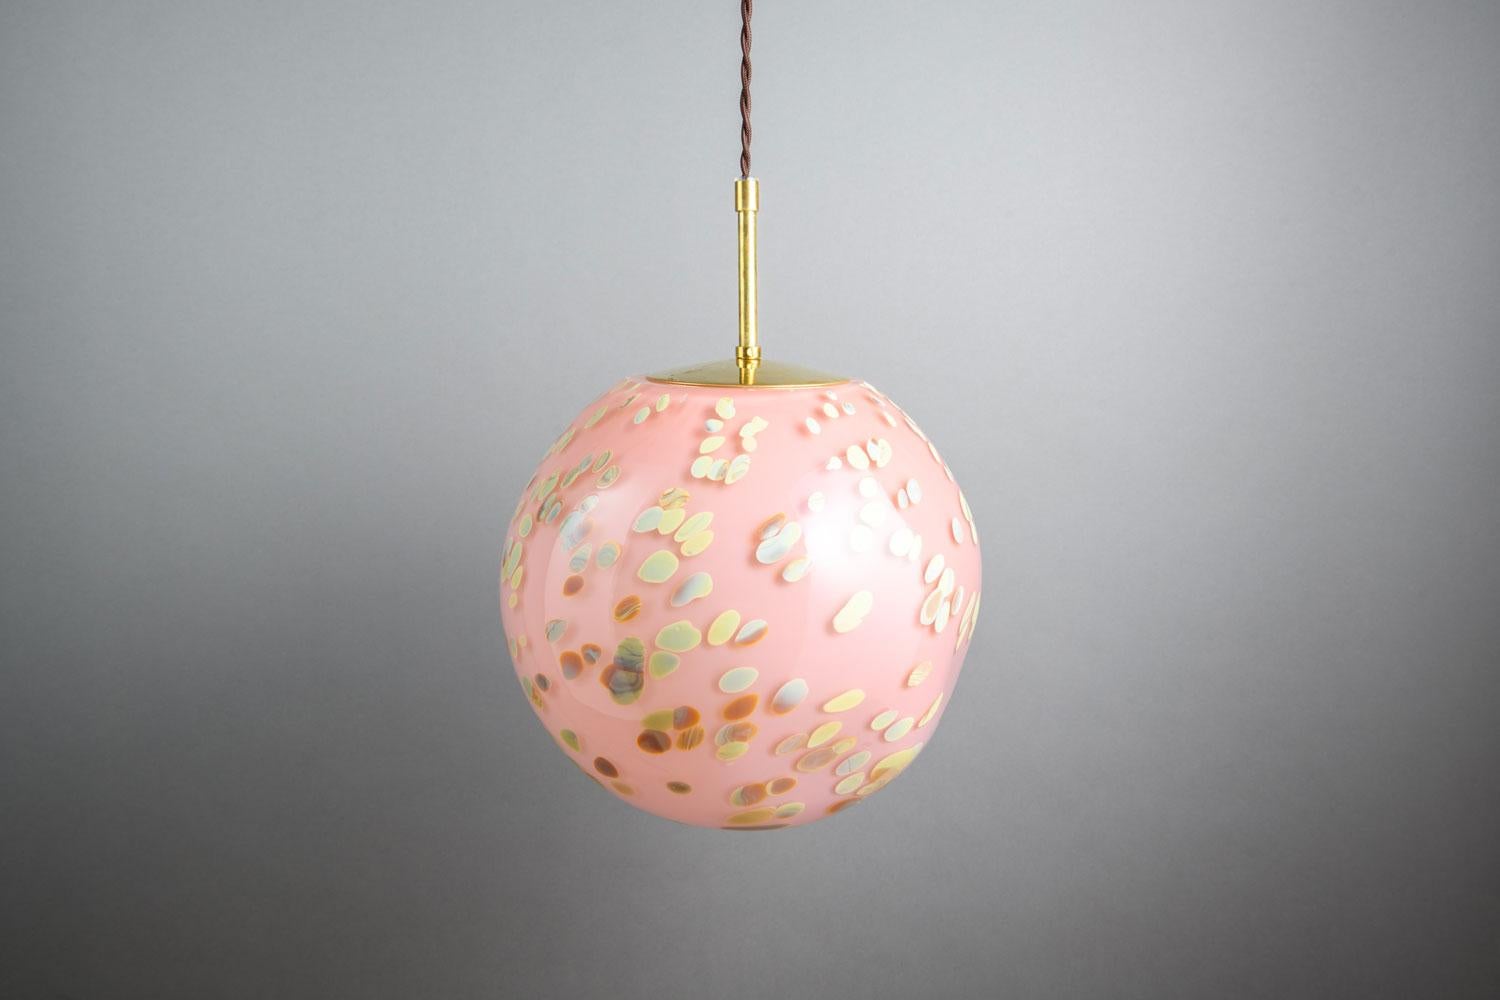 Bubblegum Light Sprinkles Bon Bon Pendant Lamp by Helle Mardahl
Dimensions: D 24 cm
Materials: glass
Also Available: other colors available,

All our lamps can be wired according to each country. If sold to the USA it will be wired for the USA